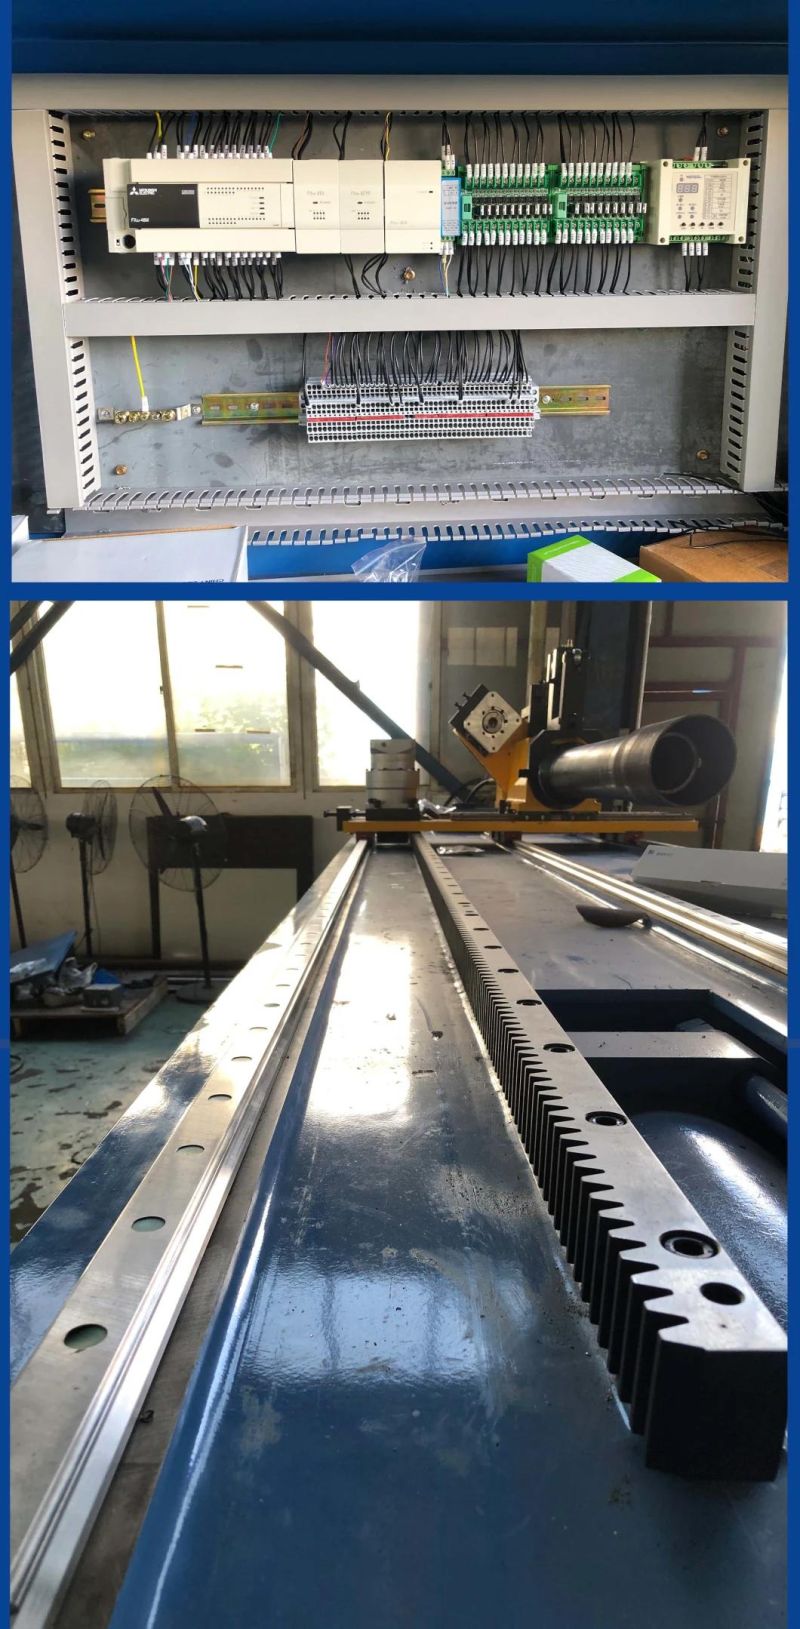 High-Efficiency Long Working-Life Tube Bending Machine Rt-75CNC at a Discount